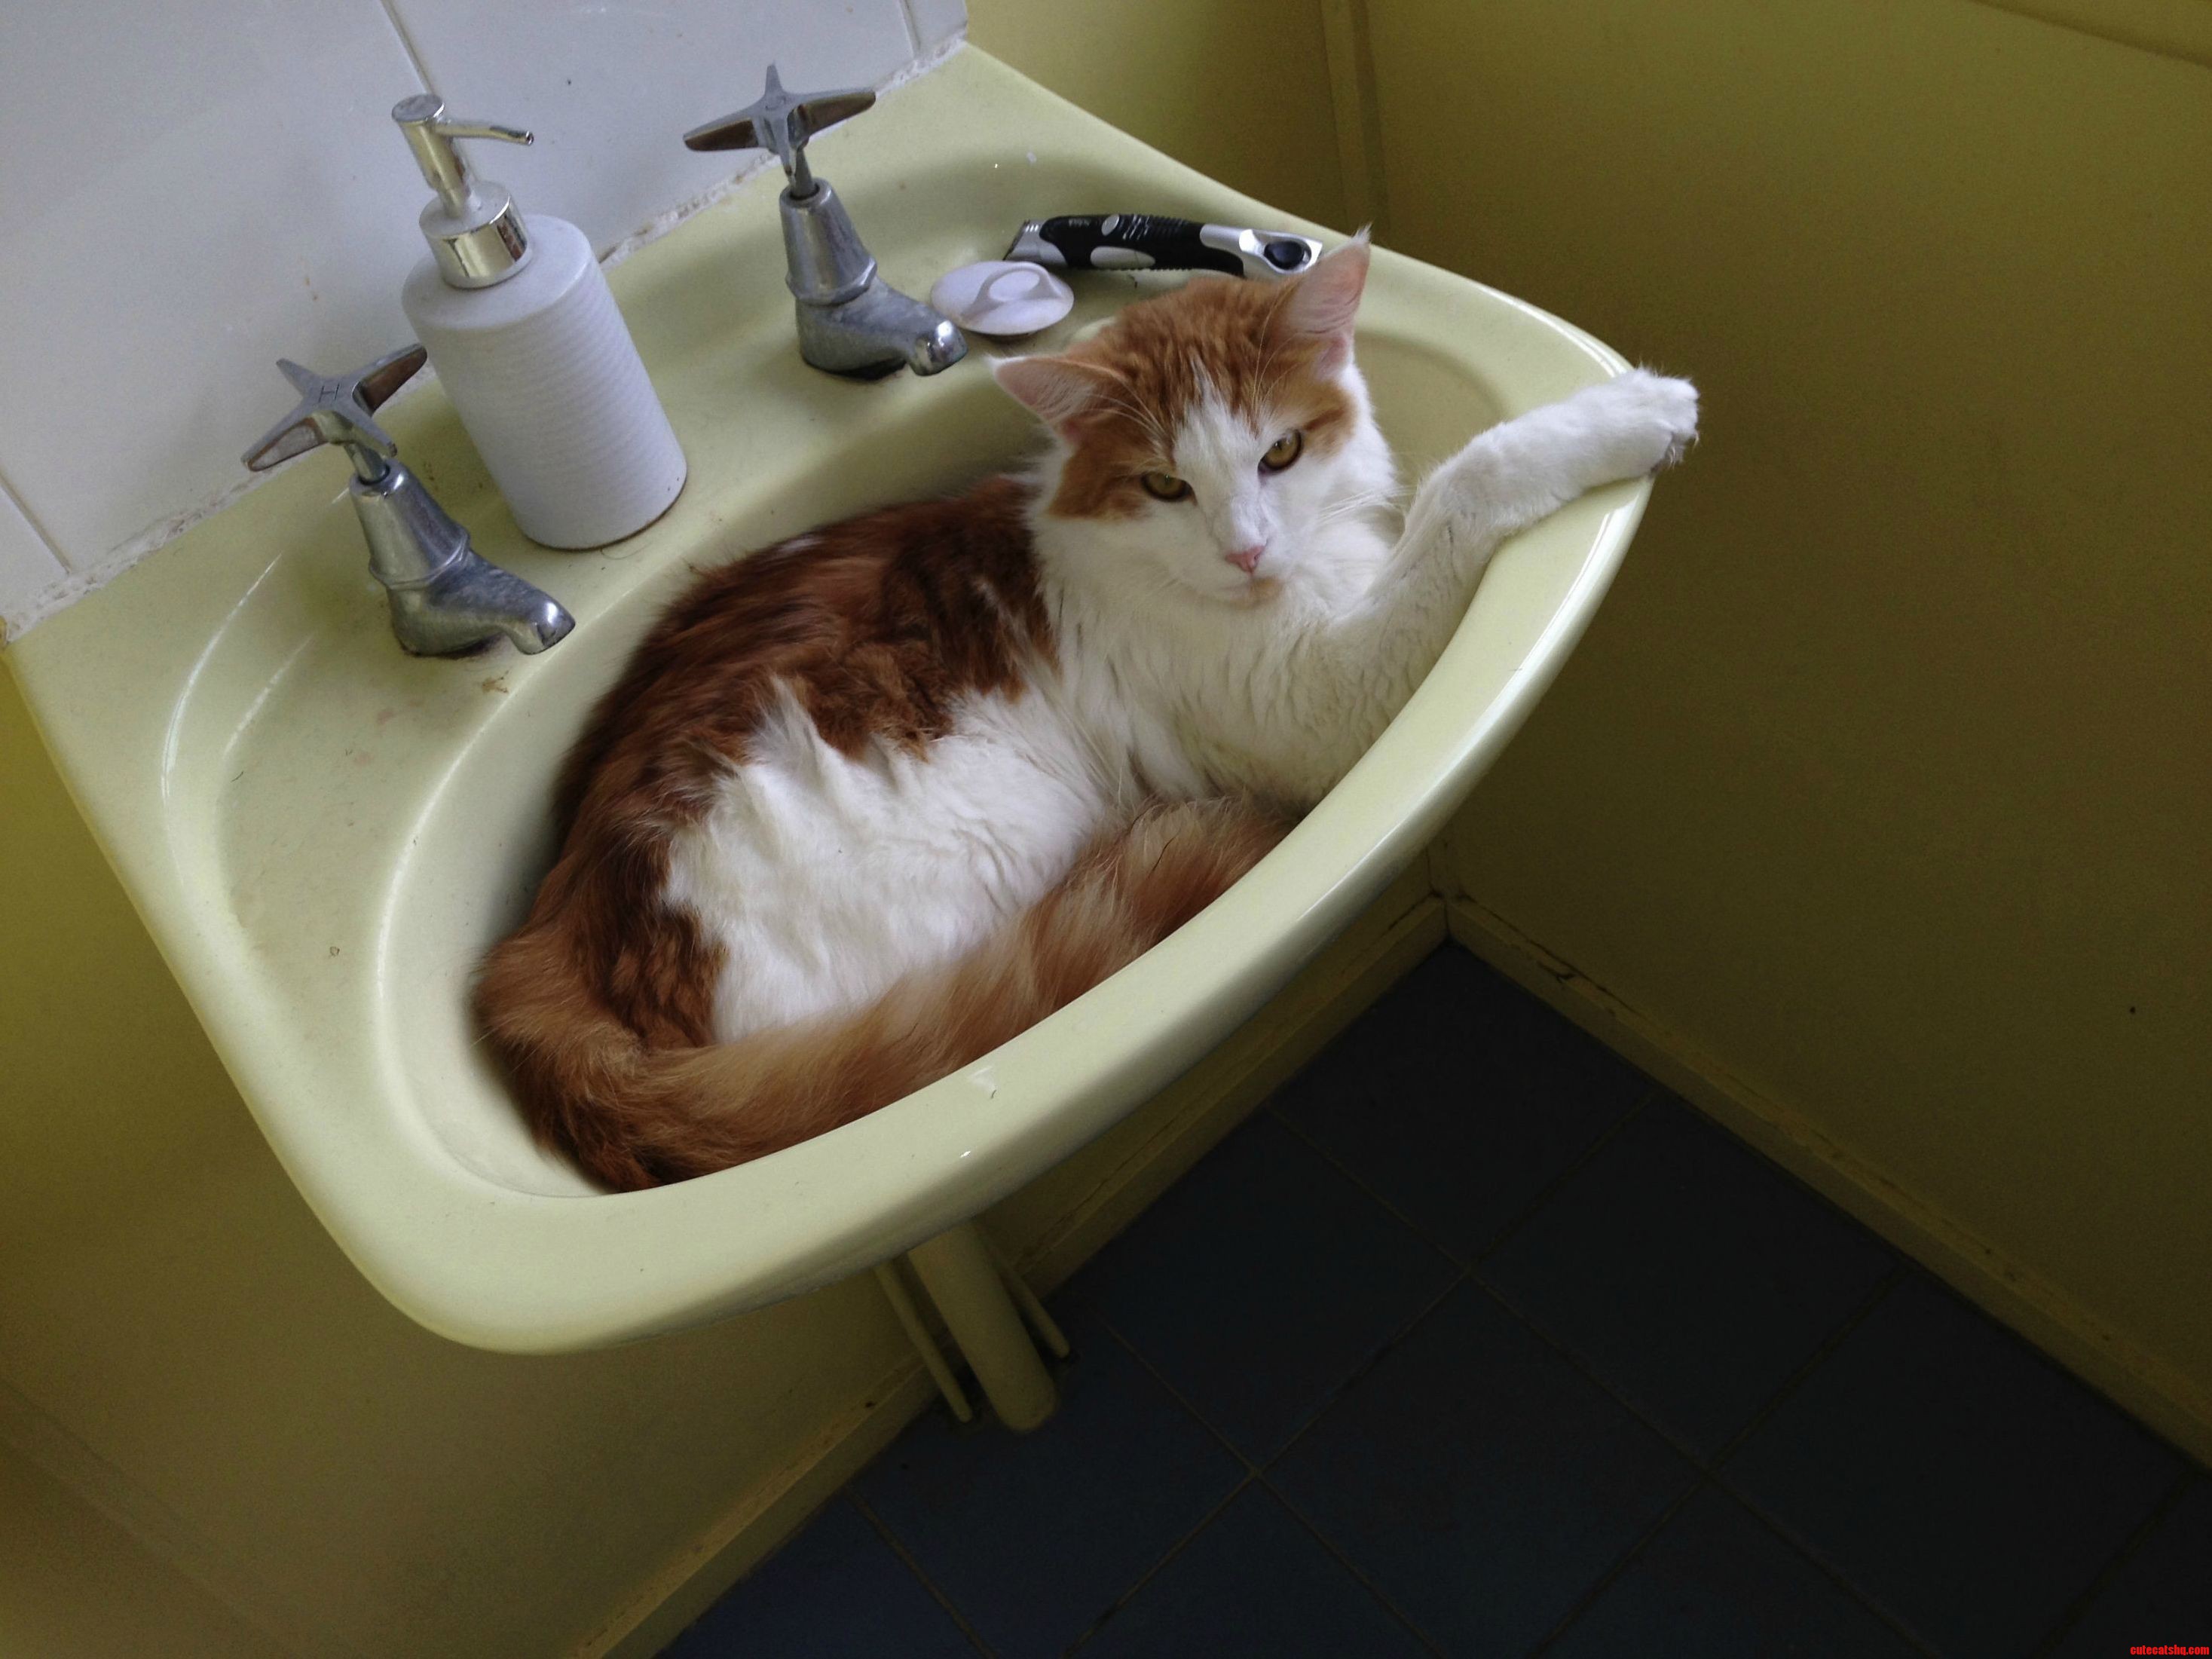 Speaking Of Cats In Sinks This Is Where Mine Does His Best Plotting.